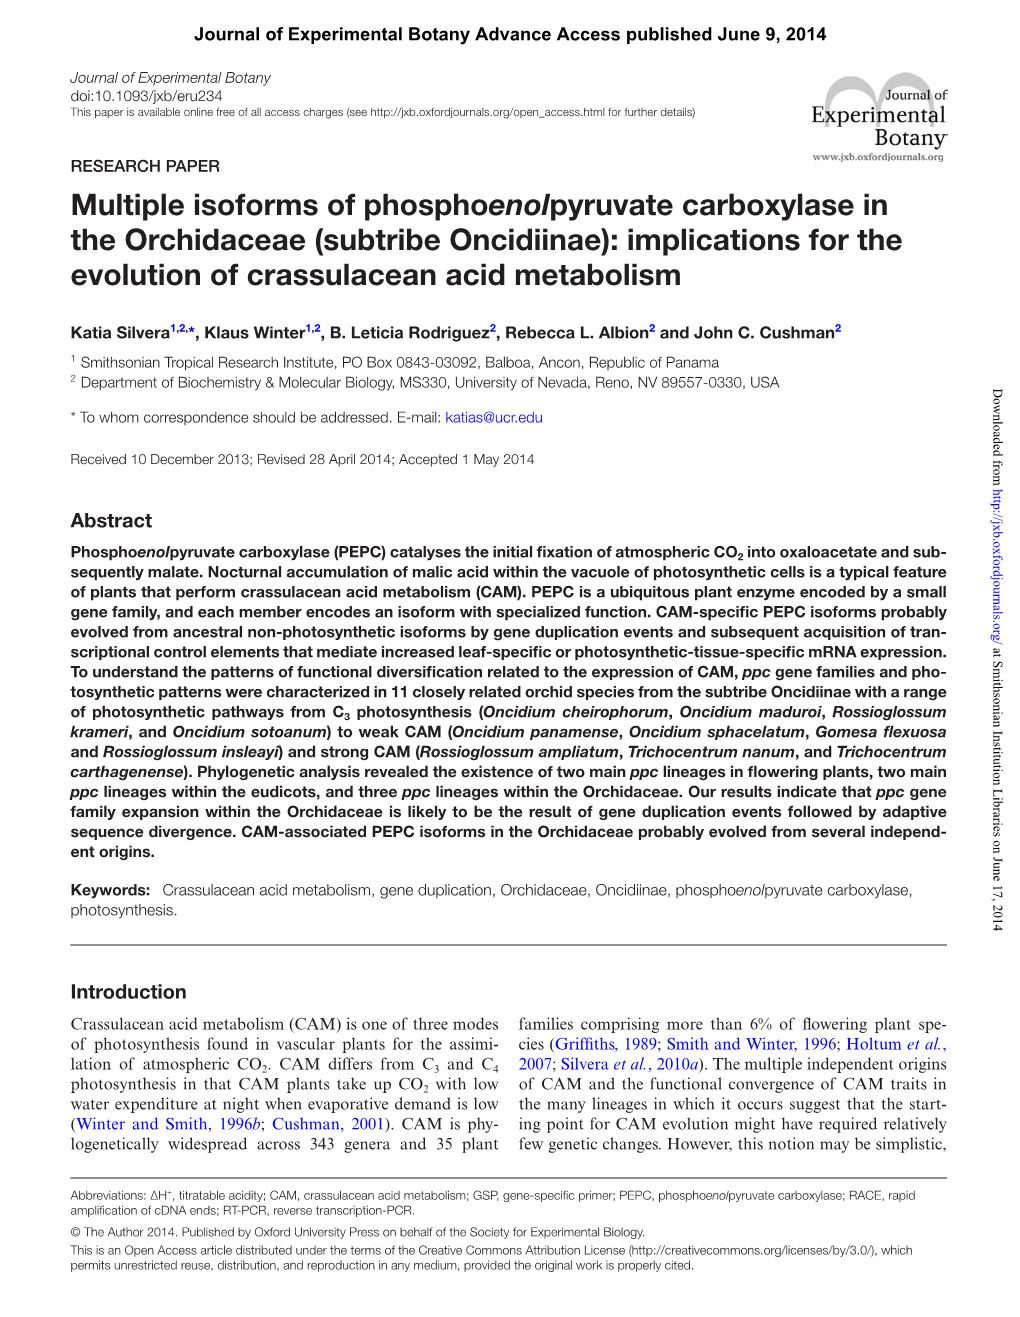 Multiple Isoforms of Phosphoenolpyruvate Carboxylase in the Orchidaceae (Subtribe Oncidiinae): Implications for the Evolution of Crassulacean Acid Metabolism